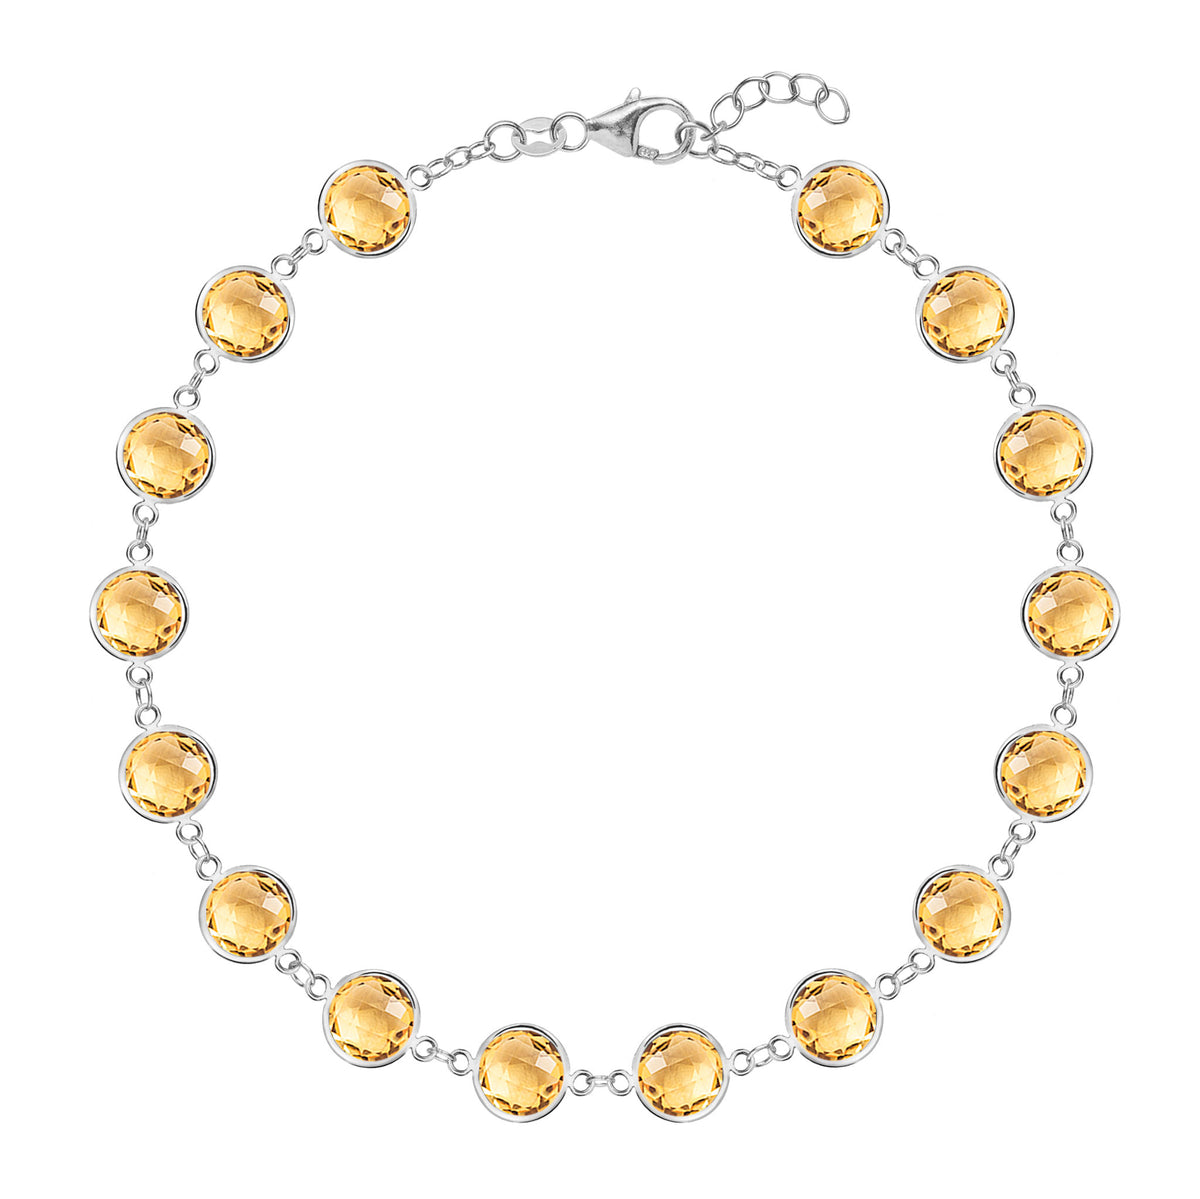 Dyed Citrine 8 mm Bead Stone Bracelet, Color- Yellow, For Men, Women, Boys  & Girls (Pack of 1 Pc.) - the best price and delivery | Globally